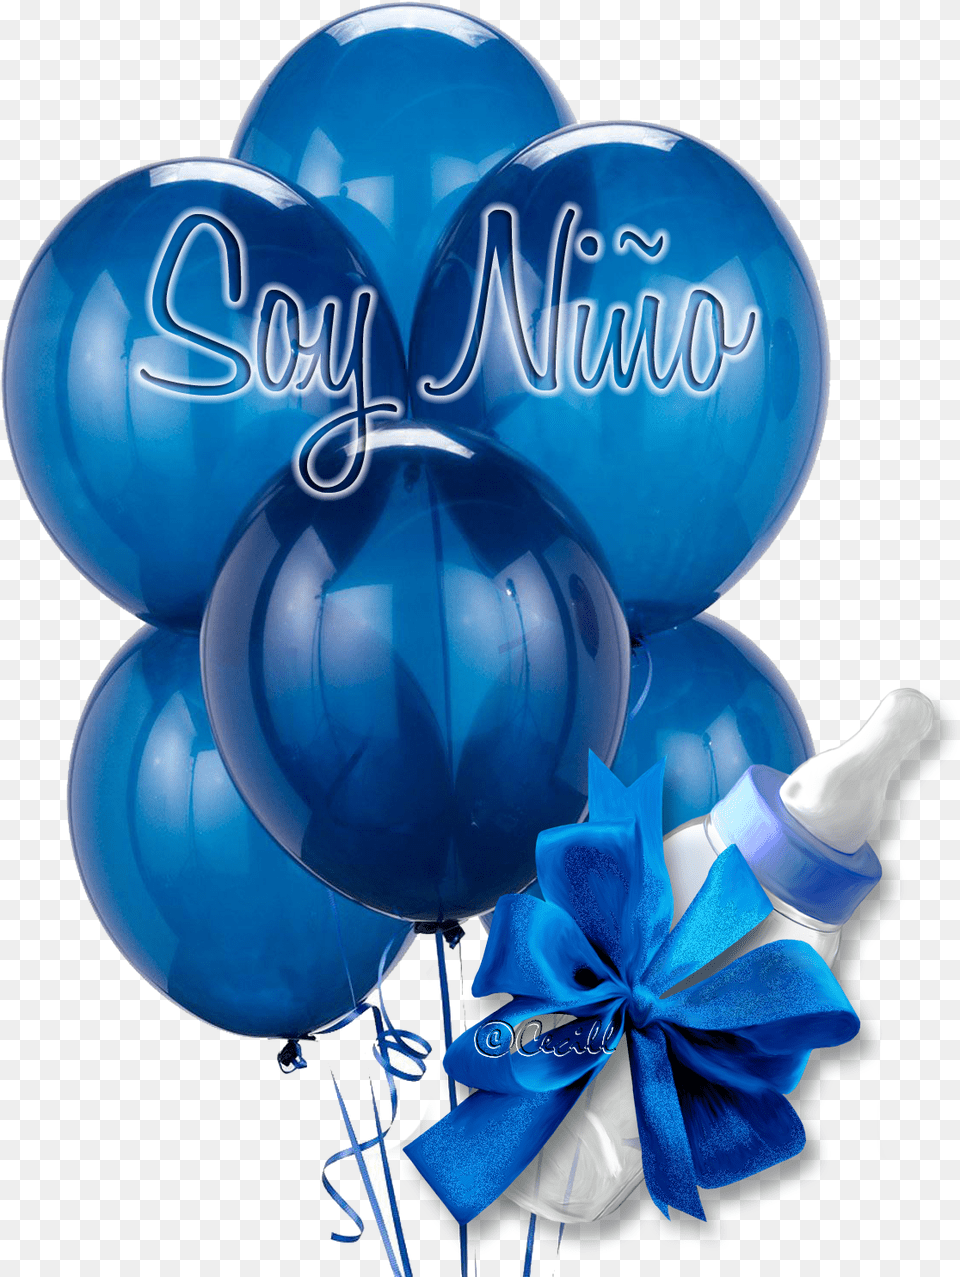 Blue Balloons Transparent Background, Balloon Png